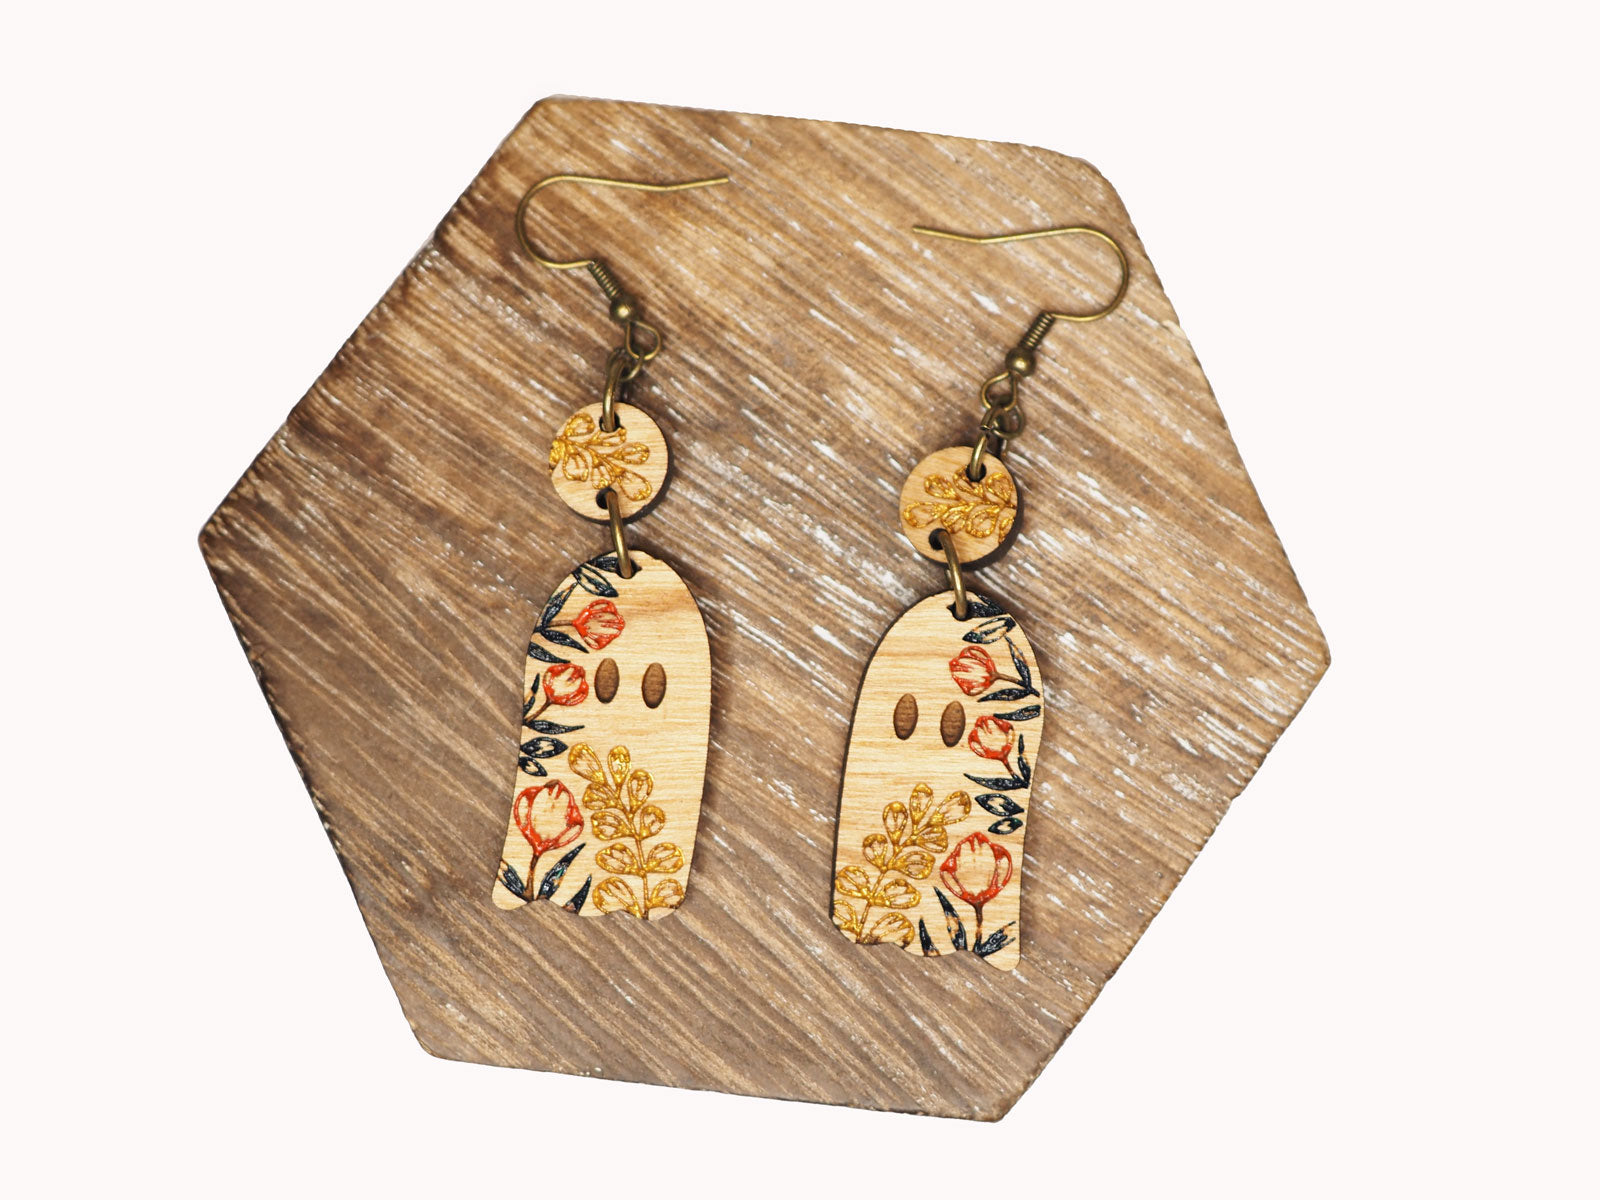 Cherry wood ghost-shaped dangle earrings with red and gold hand-painted flowers